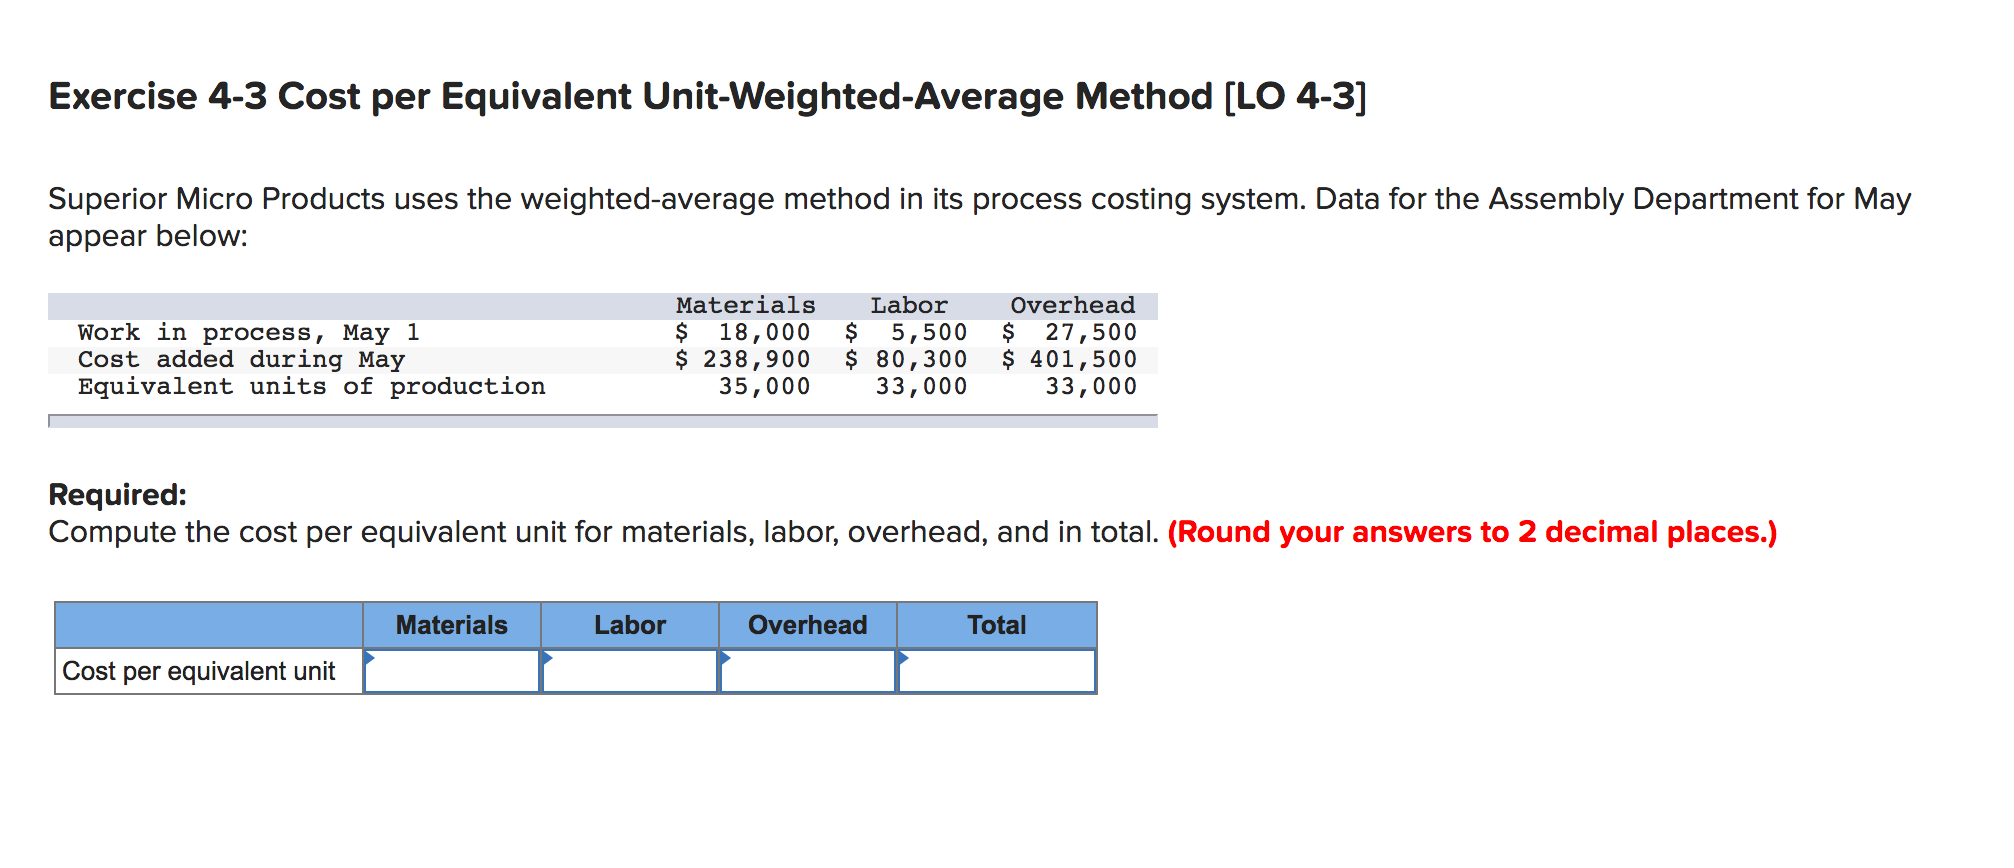 Exercise 4-3 Cost per Equivalent Unit-Weighted-Average Method [LO 4-3]
Superior Micro Products uses the weighted-average method in its process costing system. Data for the Assembly Department for May
appear below:
Materials
Labor
Overhead
Work in process, May 1
Cost added during May
Equivalent units of production
5,500
$ 80,300
33,000
18,000
$ 238,900
35,000
2$
27,500
$ 401,500
33,000
Required:
Compute the cost per equivalent unit for materials, labor, overhead, and in total. (Round your answers to 2 decimal places.)
Total
Materials
Overhead
Labor
Cost per equivalent unit
